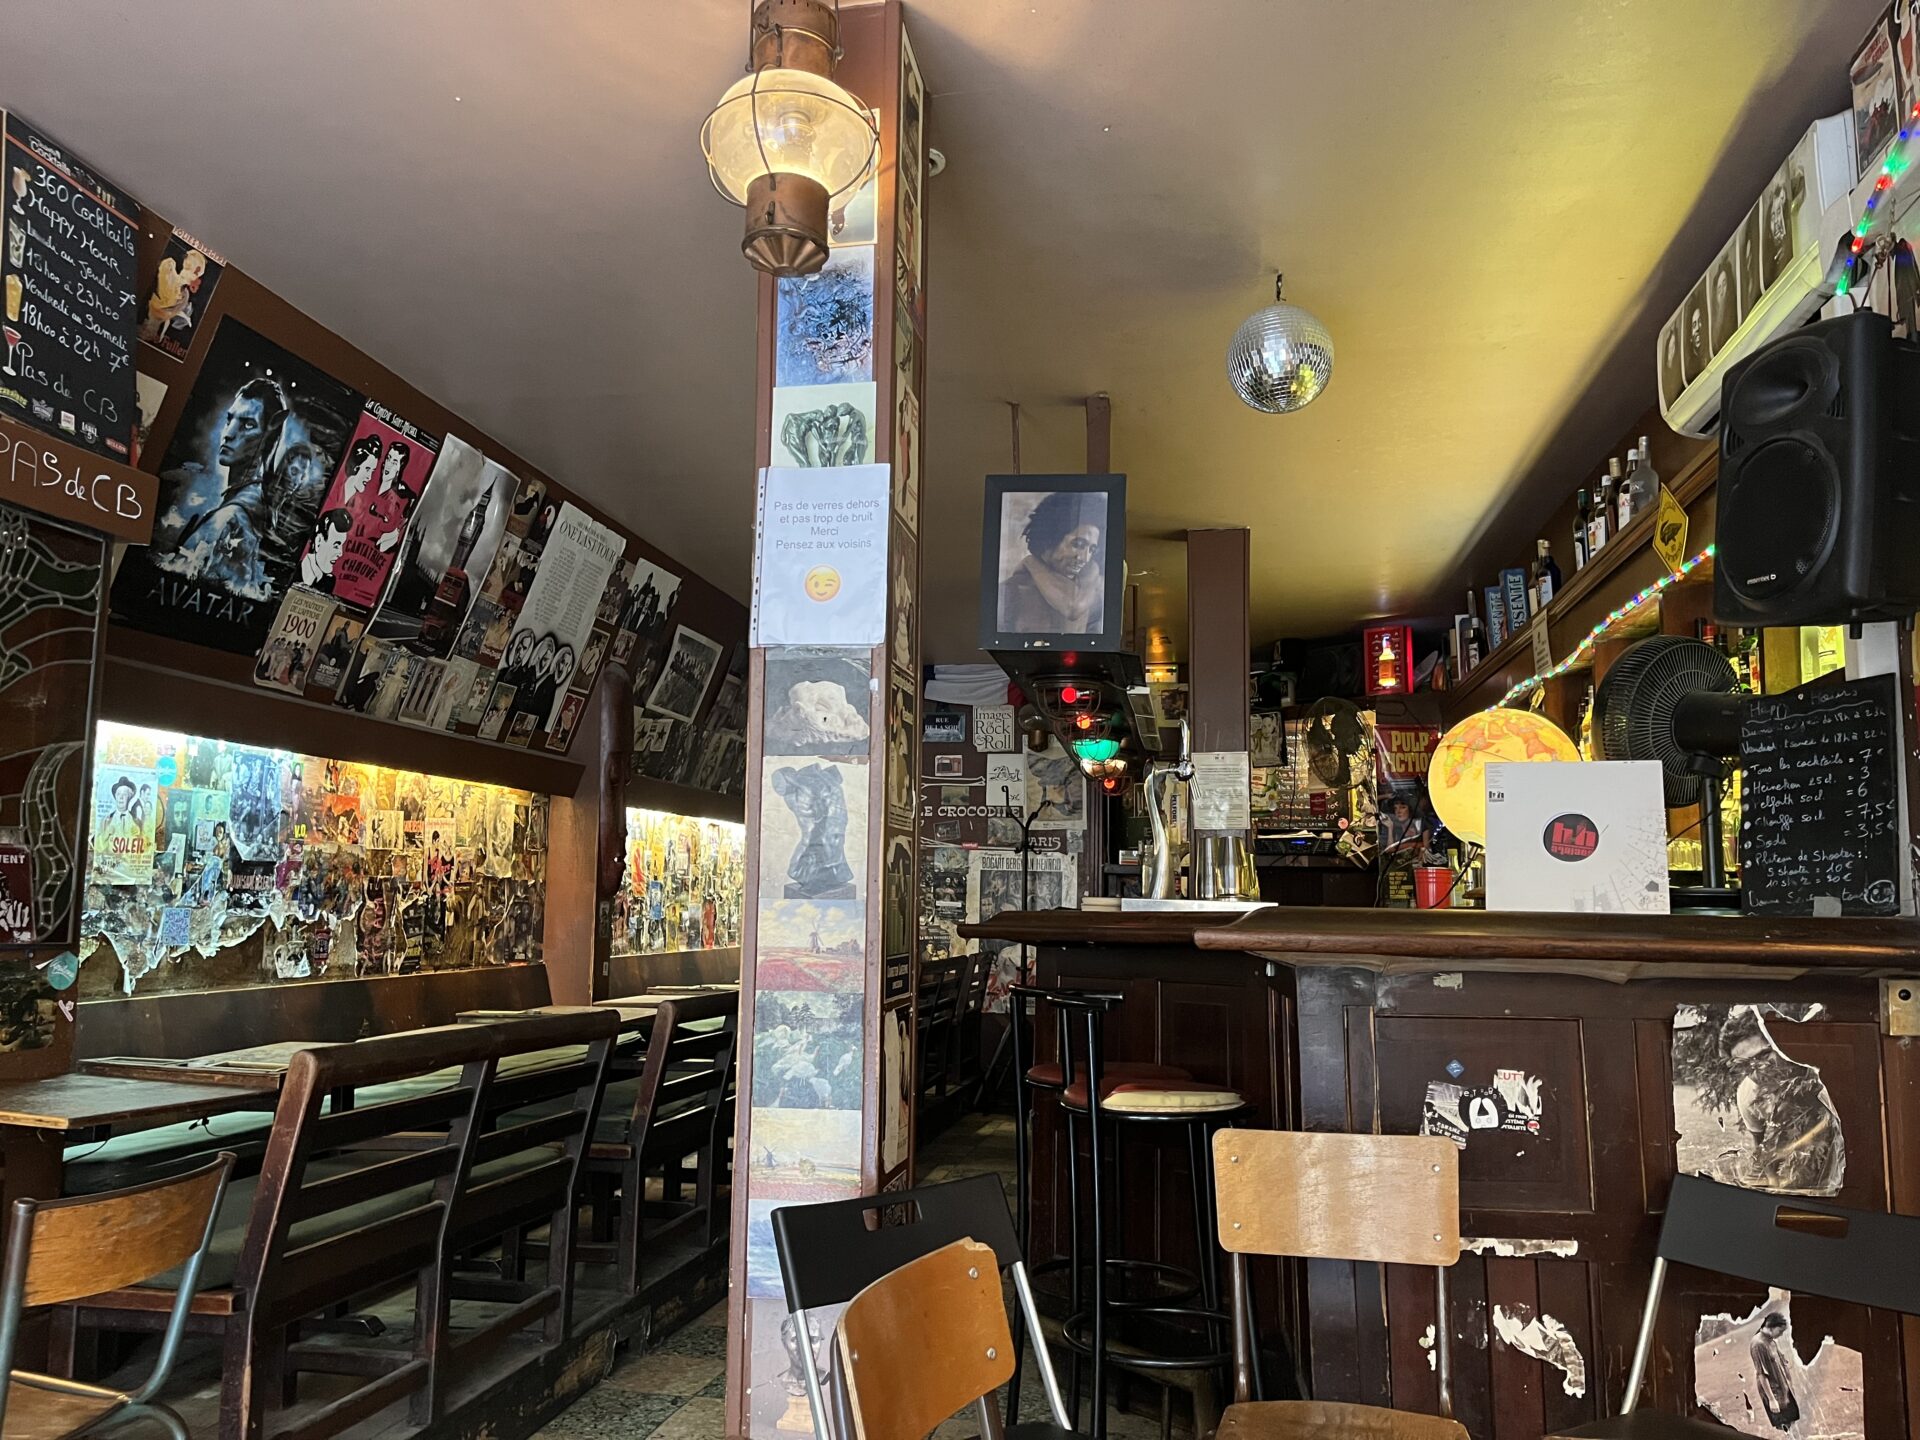 Bar interior plastered with posters